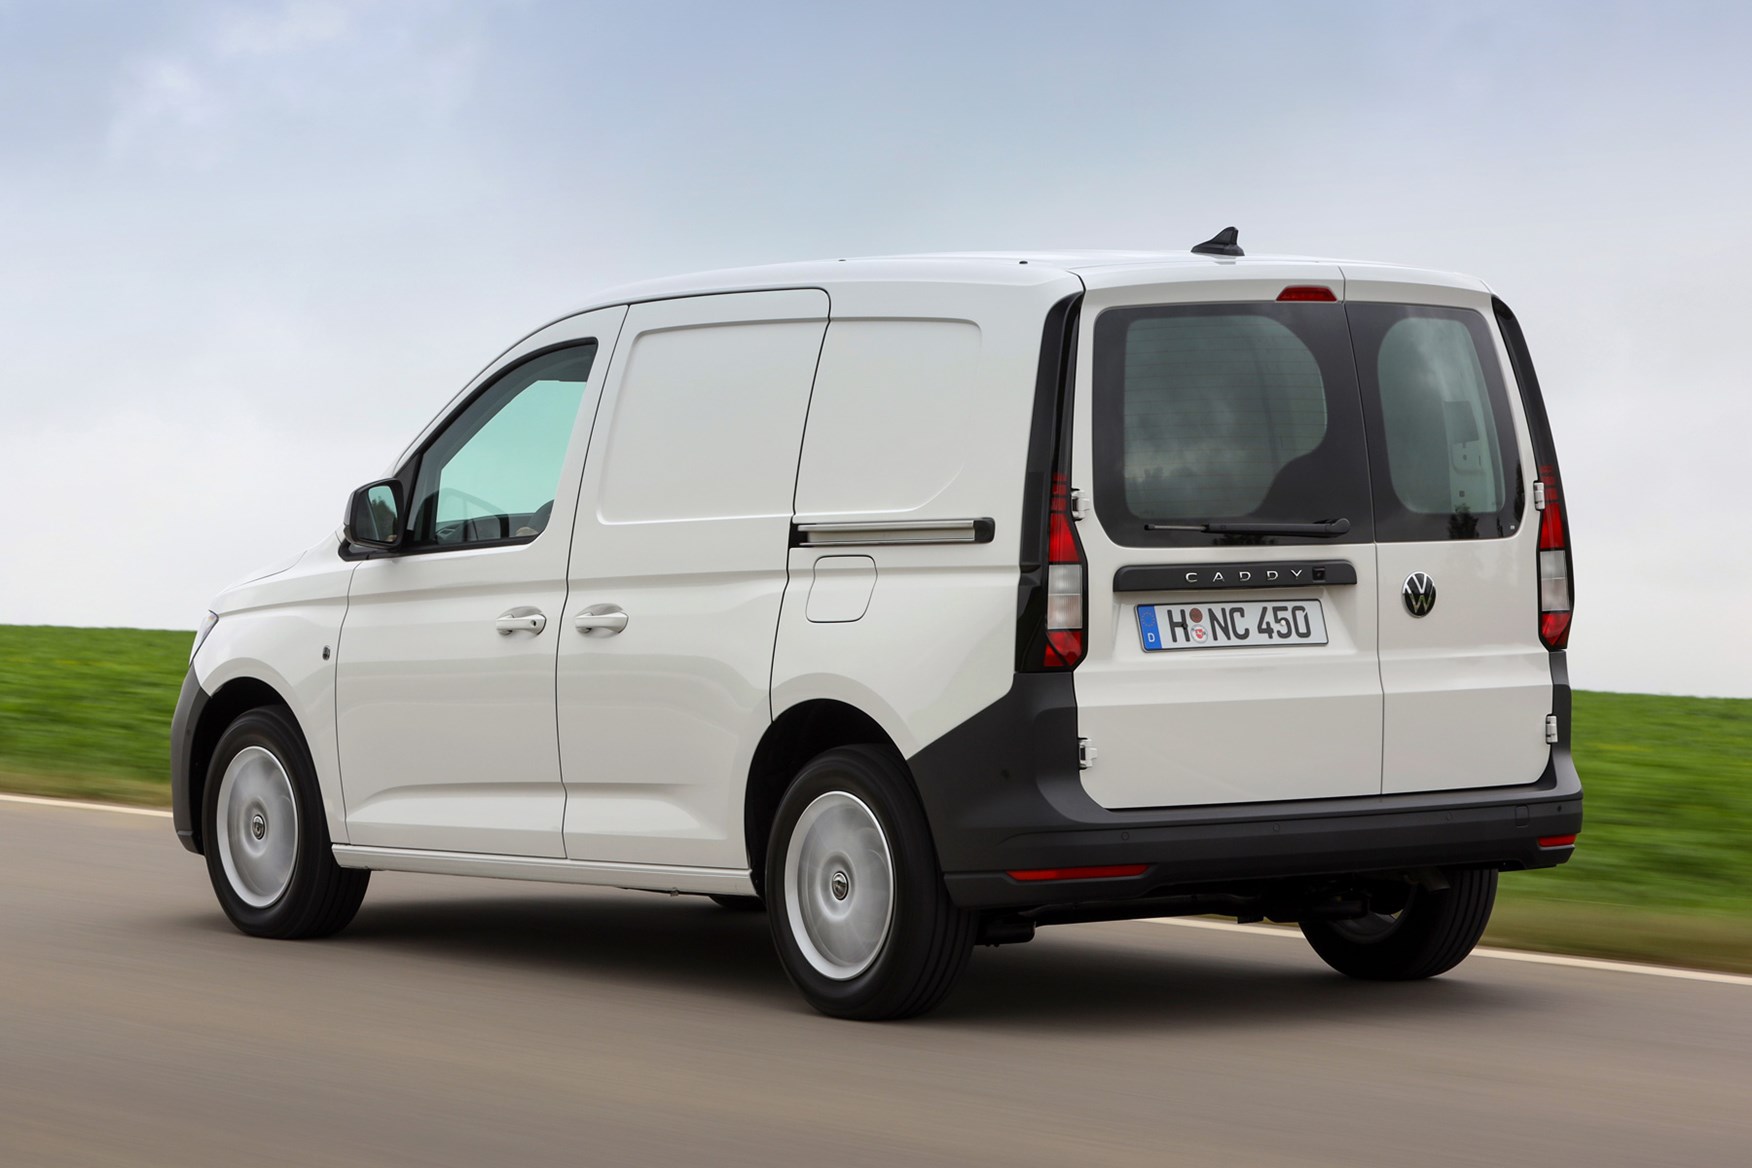 Volkswagen Caddy Cargo new name, pricing and full spec for VW’s